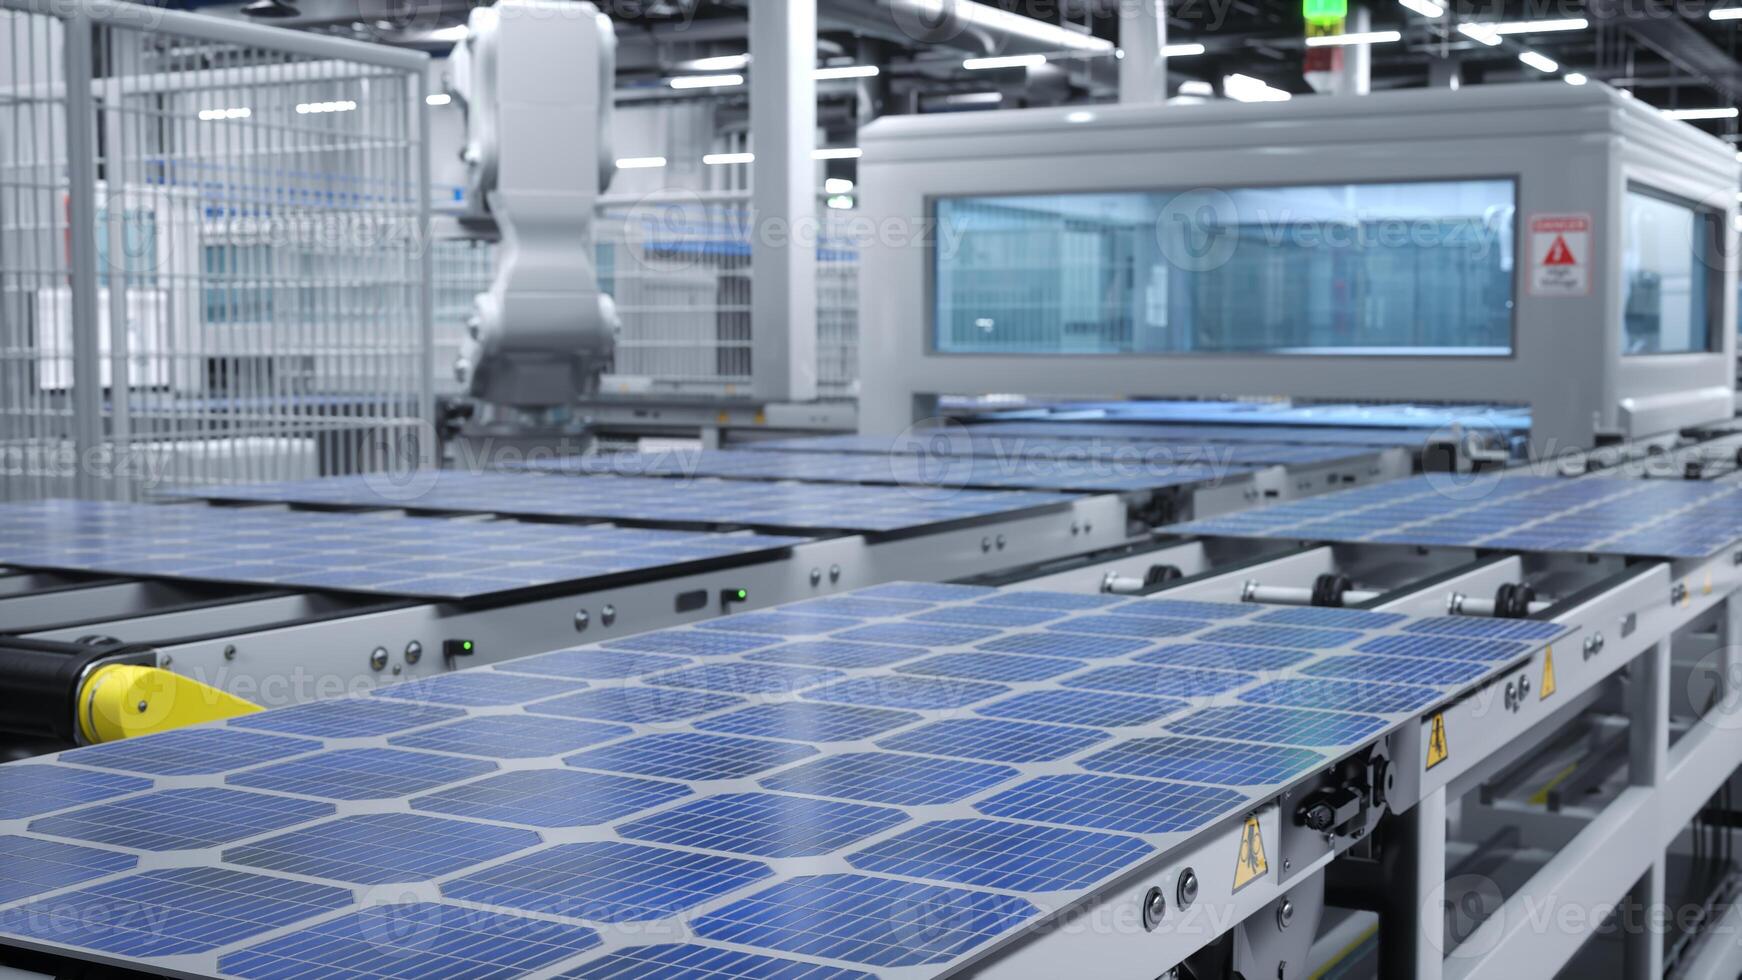 Solar panel factory with industrial robot arms placing PV modules on conveyor belts, 3D illustration of industrial building interior. Mass production warehouse producing renewable energy solar cells photo